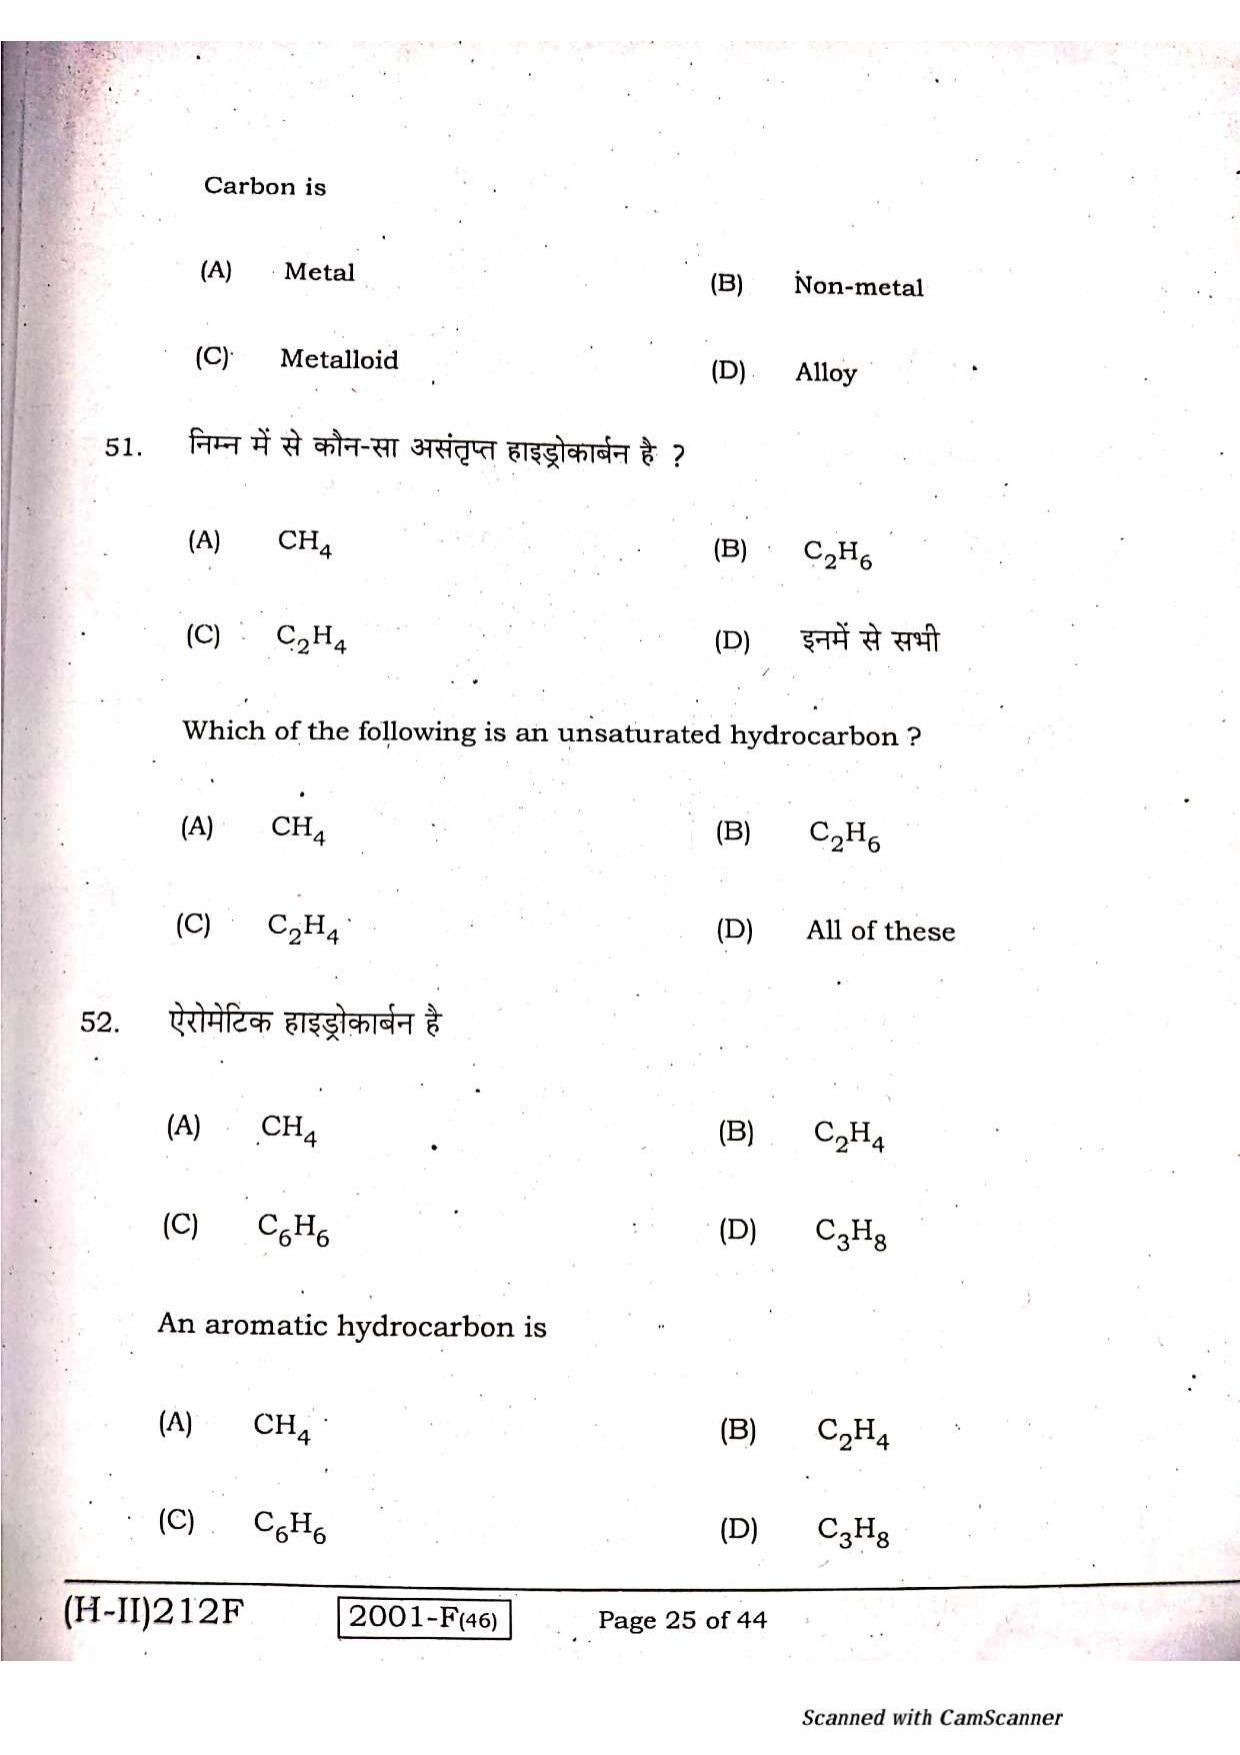 Bihar Board Class 10 Science 2021 (2nd Sitting) Question Paper - Page 23